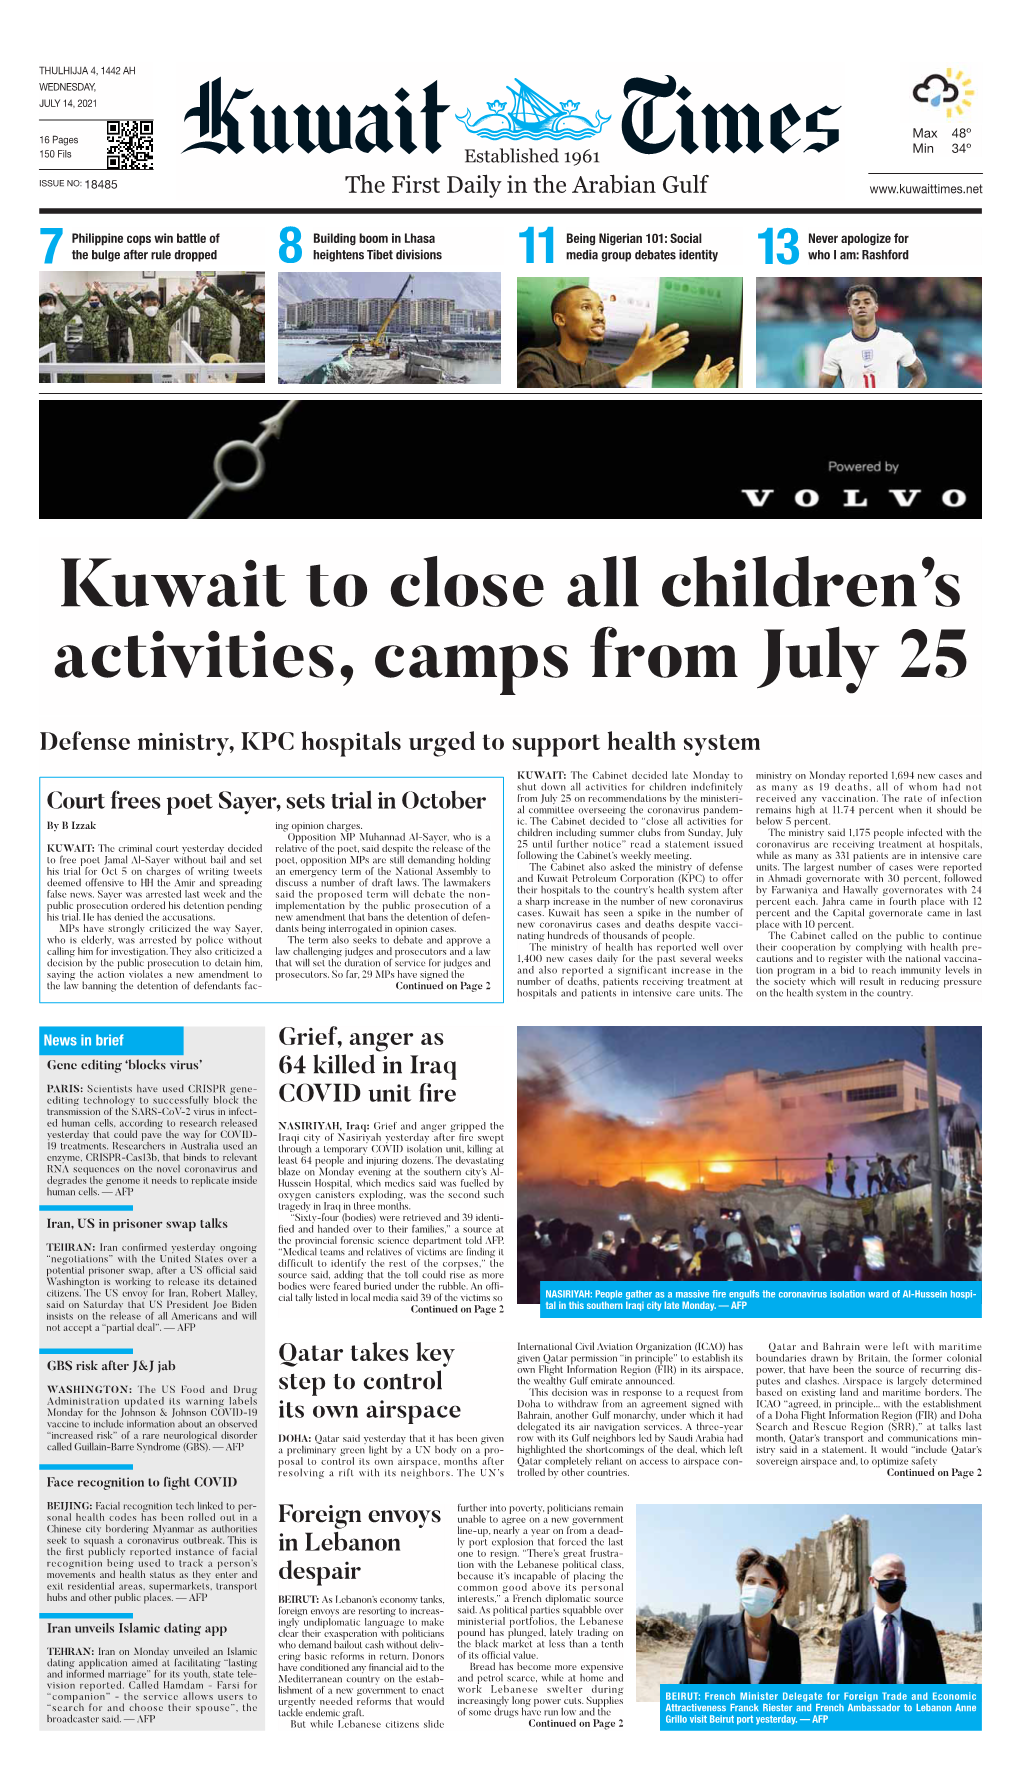 Kuwait to Close All Children's Activities, Camps from July 25